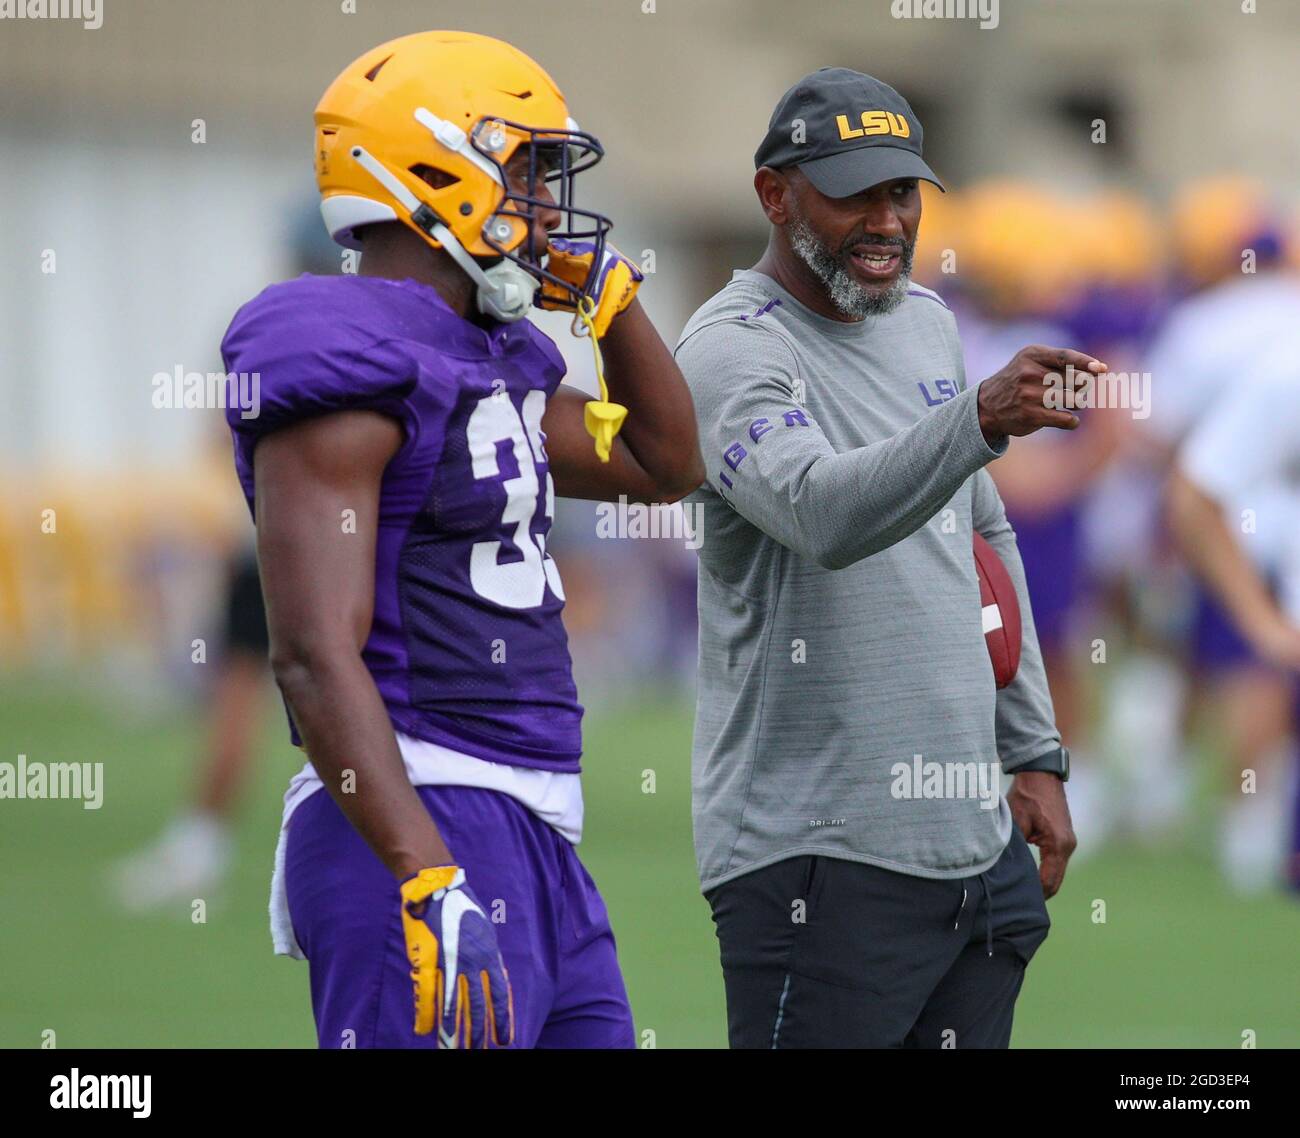 August 10, 2021: LSU Defensive Back Coach Corey Raymond talks with Lloyd Cole (33) during the first week of fall football camp at the LSU Charles McClendon Practice Facility in Baton Rouge, LA. Jonathan Mailhes/CSM Stock Photo